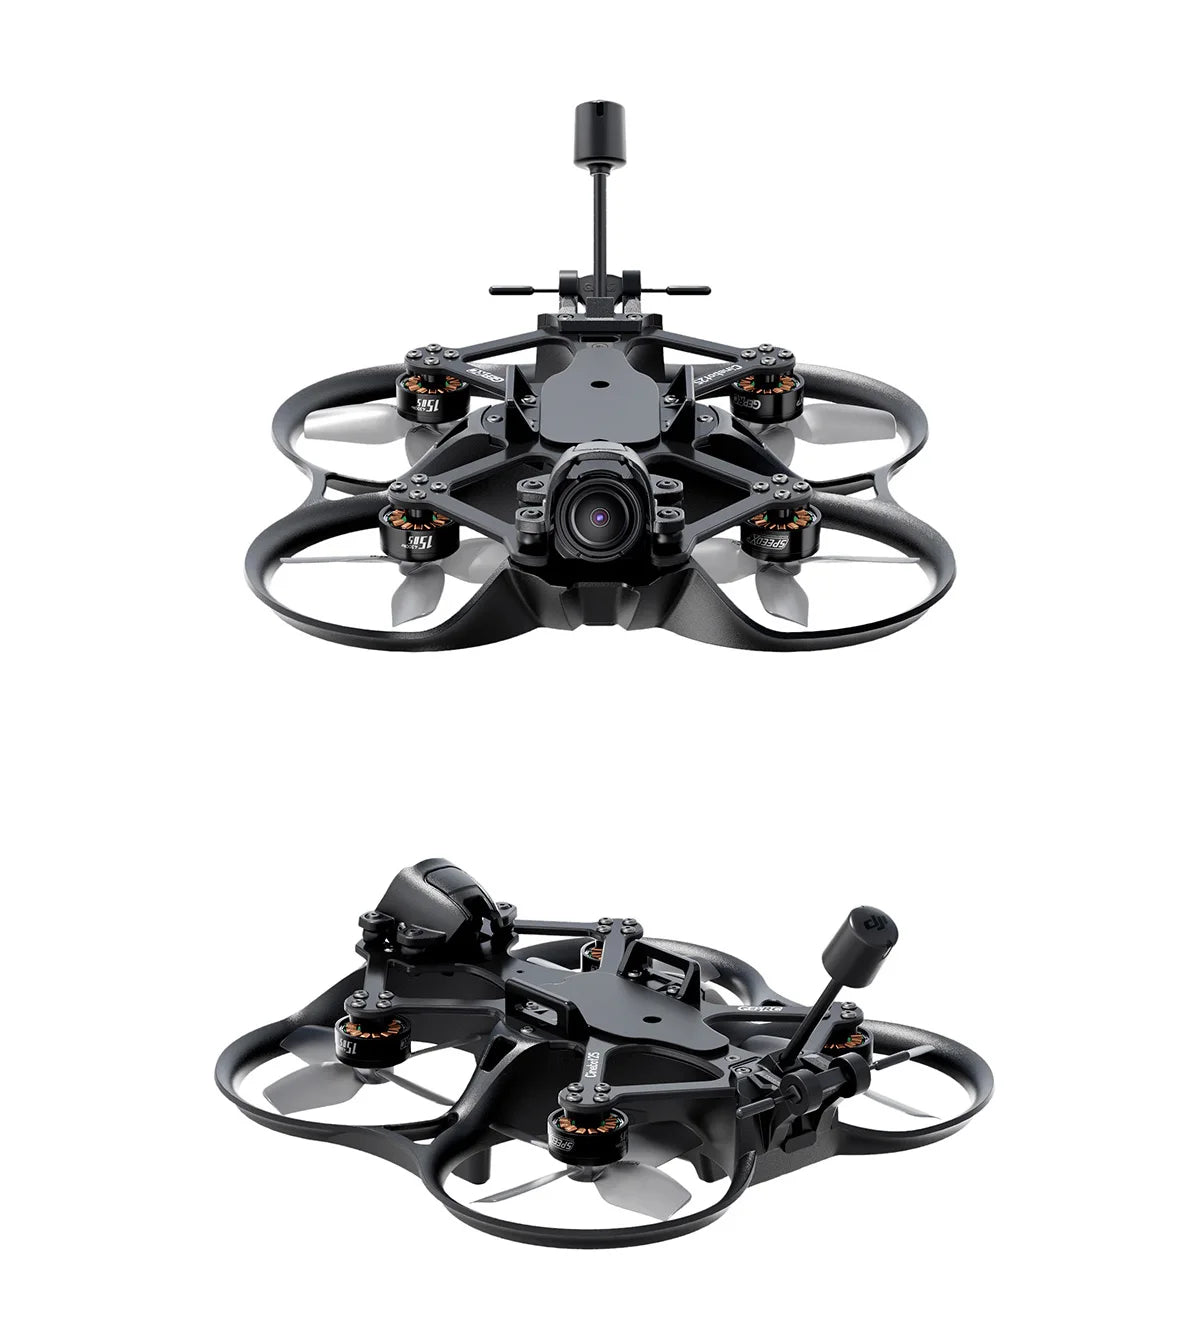 GEPRC Cinebot25 WTFPV FPV Drone, the integrated structure adopts revolutionary modified materials to satisfy the need for rigidity and flexibility .